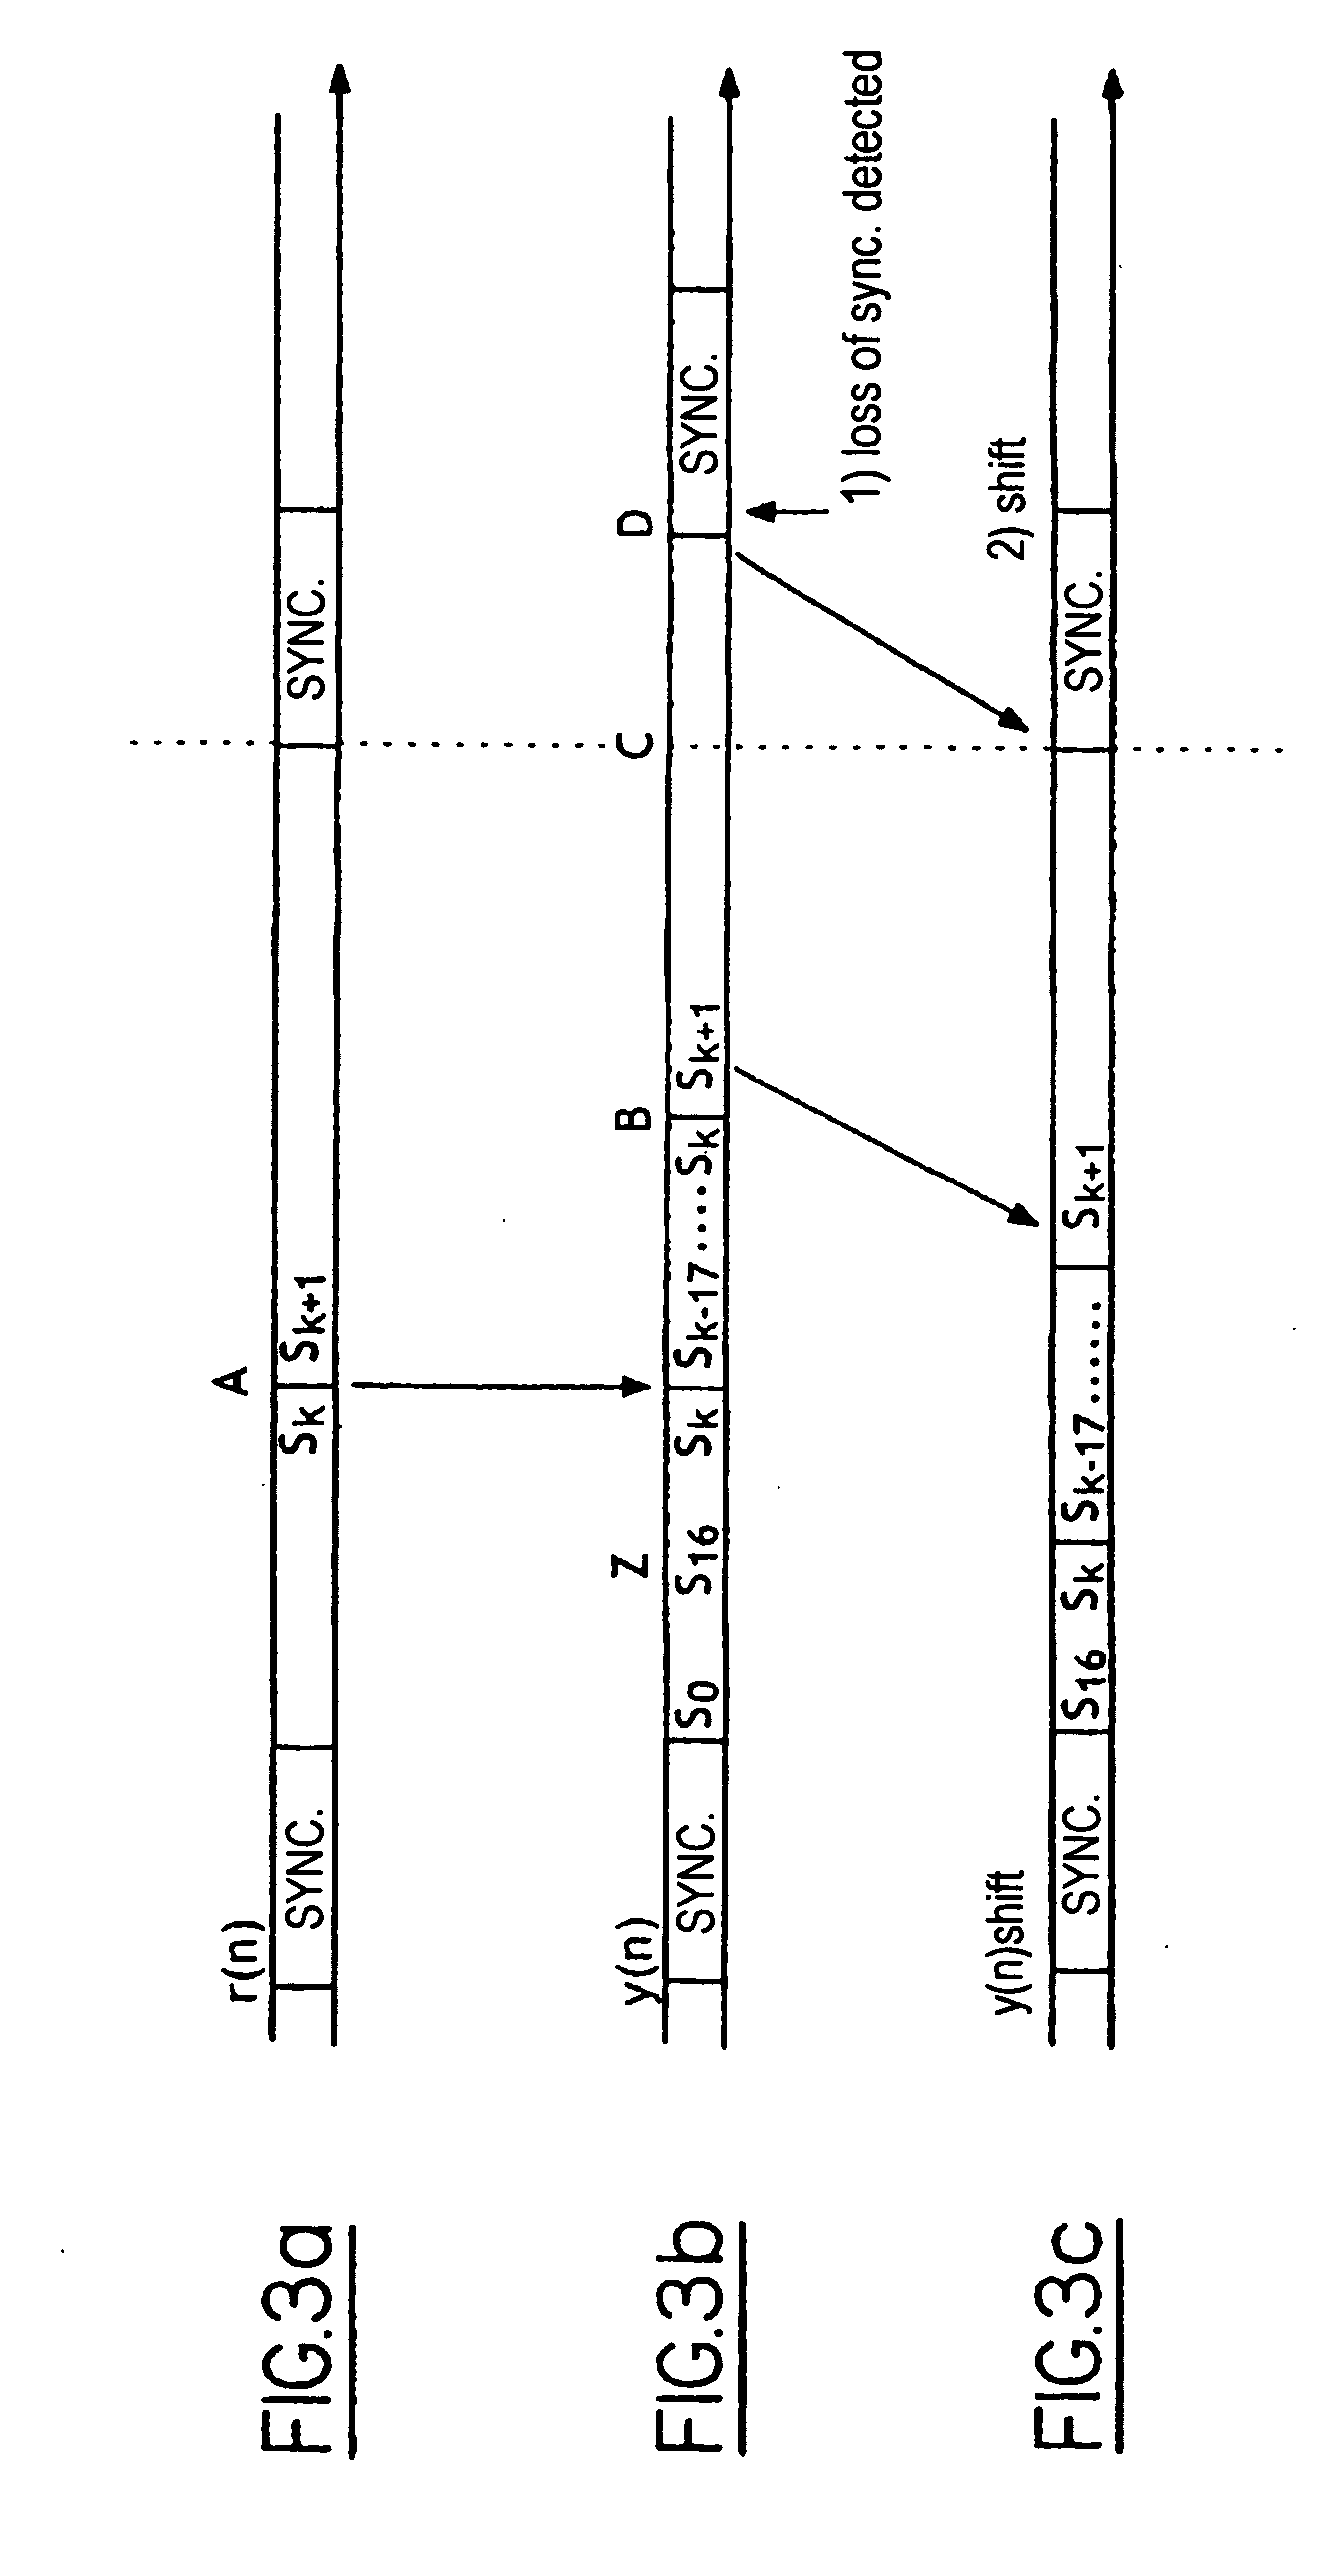 Method for synchronizing an equalizer output data